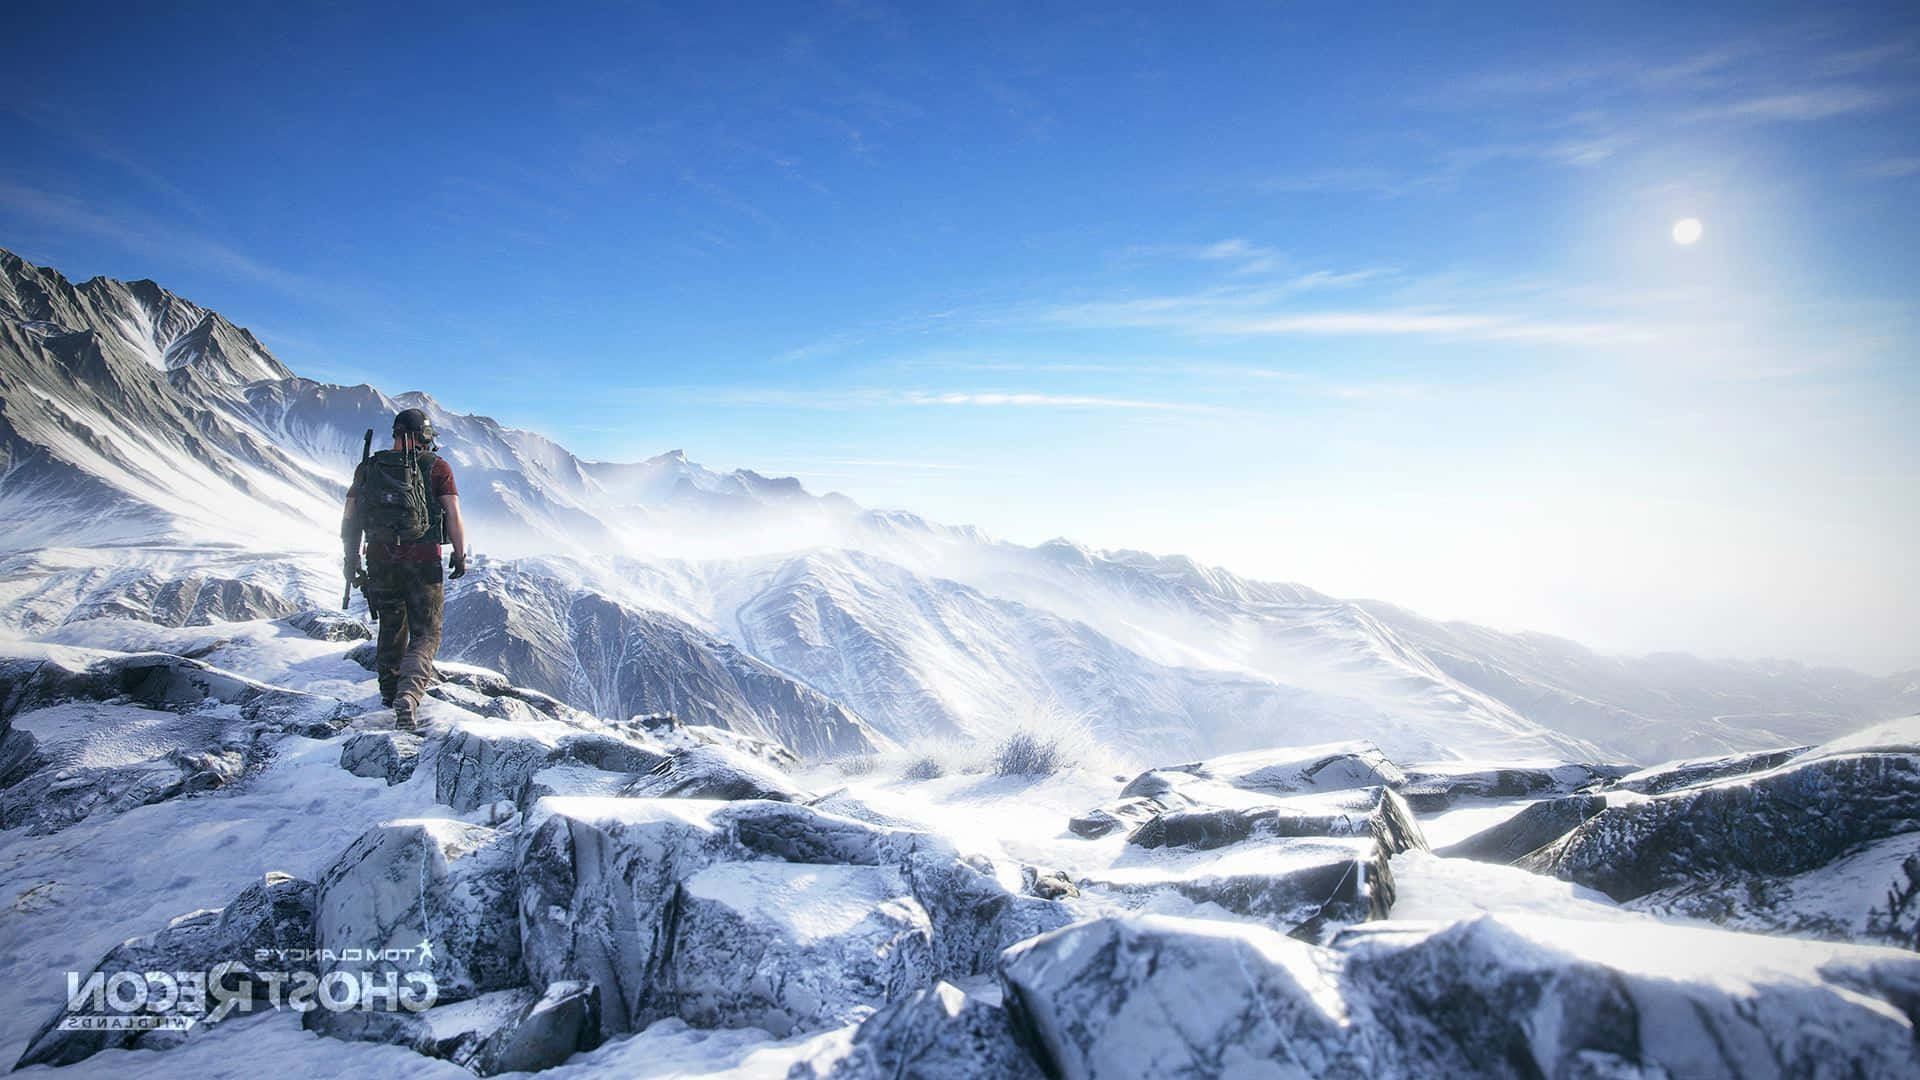 A Man Standing On Top Of A Mountain In A Snowy Area